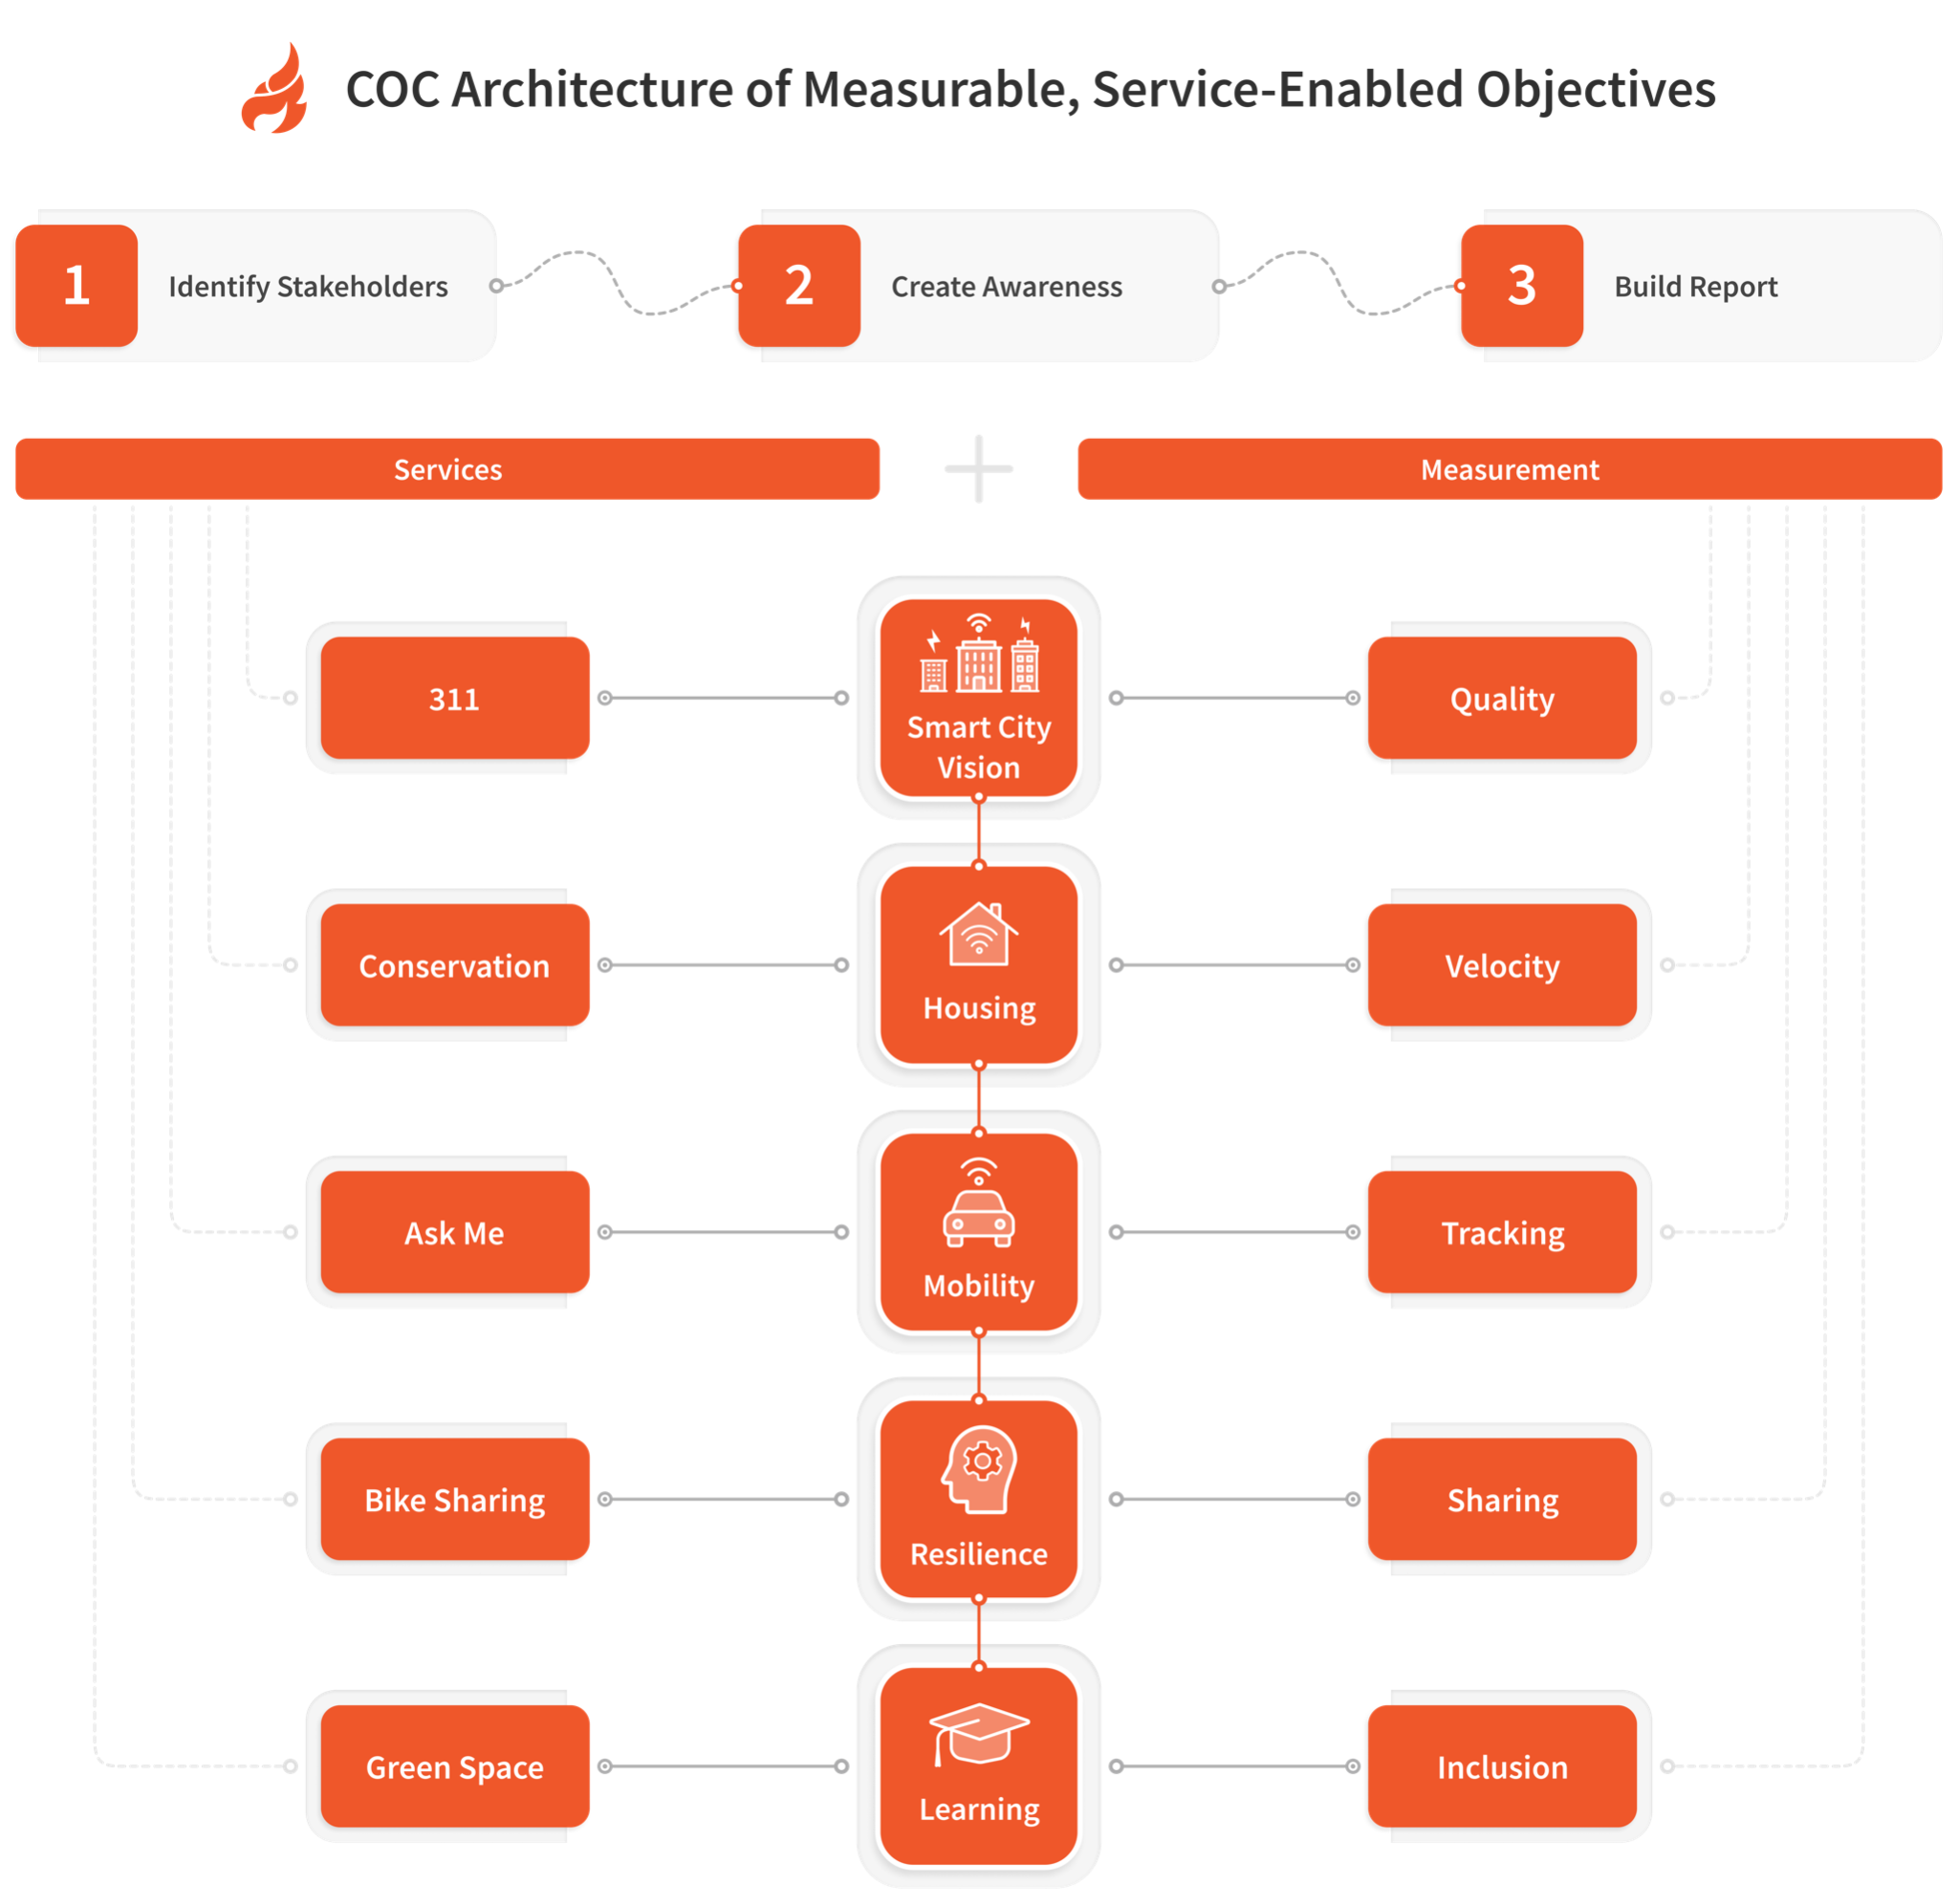 COC Architecture of Measurable, Service-Enabled Objectives